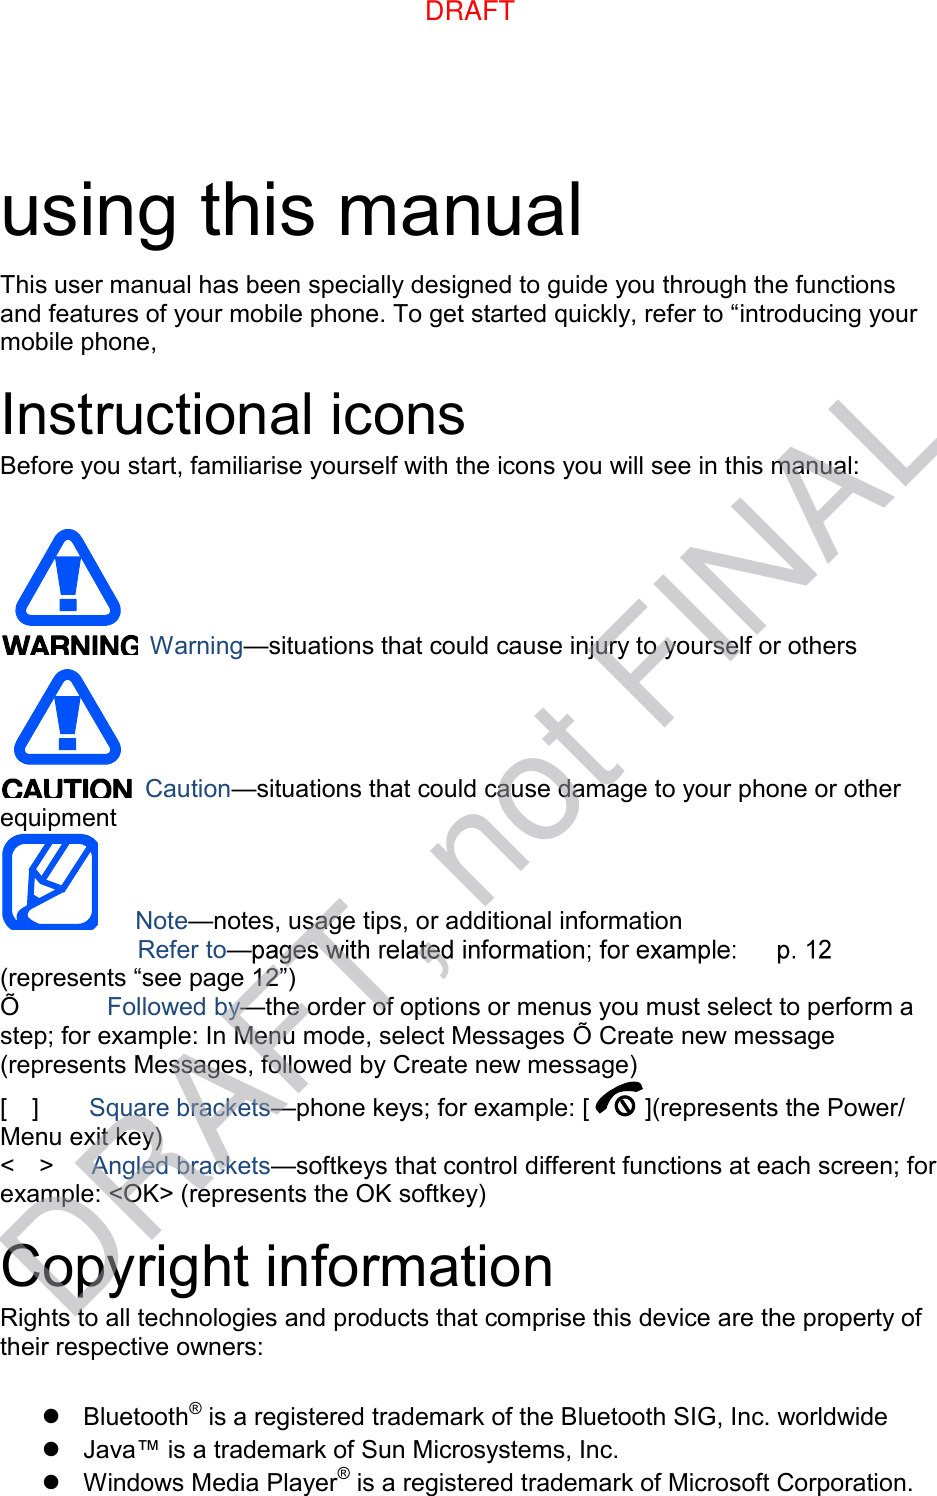 using this manual This user manual has been specially designed to guide you through the functions and features of your mobile phone. To get started quickly, refer to “introducing your mobile phone, Instructional icons Before you start, familiarise yourself with the icons you will see in this manual: Warning—situations that could cause injury to yourself or others Caution—situations that could cause damage to your phone or other equipment Note—notes, usage tips, or additional information     Refer to—(represents “see page 12”) Õ      Followed by—the order of options or menus you must select to perform a step; for example: In Menu mode, select Messages Õ Create new message (represents Messages, followed by Create new message) [    ]    Square brackets—phone keys; for example: [ ](represents the Power/ Menu exit key) &lt;    &gt;    Angled brackets—softkeys that control different functions at each screen; for example: &lt;OK&gt; (represents the OK softkey) Copyright information Rights to all technologies and products that comprise this device are the property of their respective owners: Bluetooth® is a registered trademark of the Bluetooth SIG, Inc. worldwideJava™ is a trademark of Sun Microsystems, Inc.Windows Media Player® is a registered trademark of Microsoft Corporation.DRAFTDRAFT, not FINAL